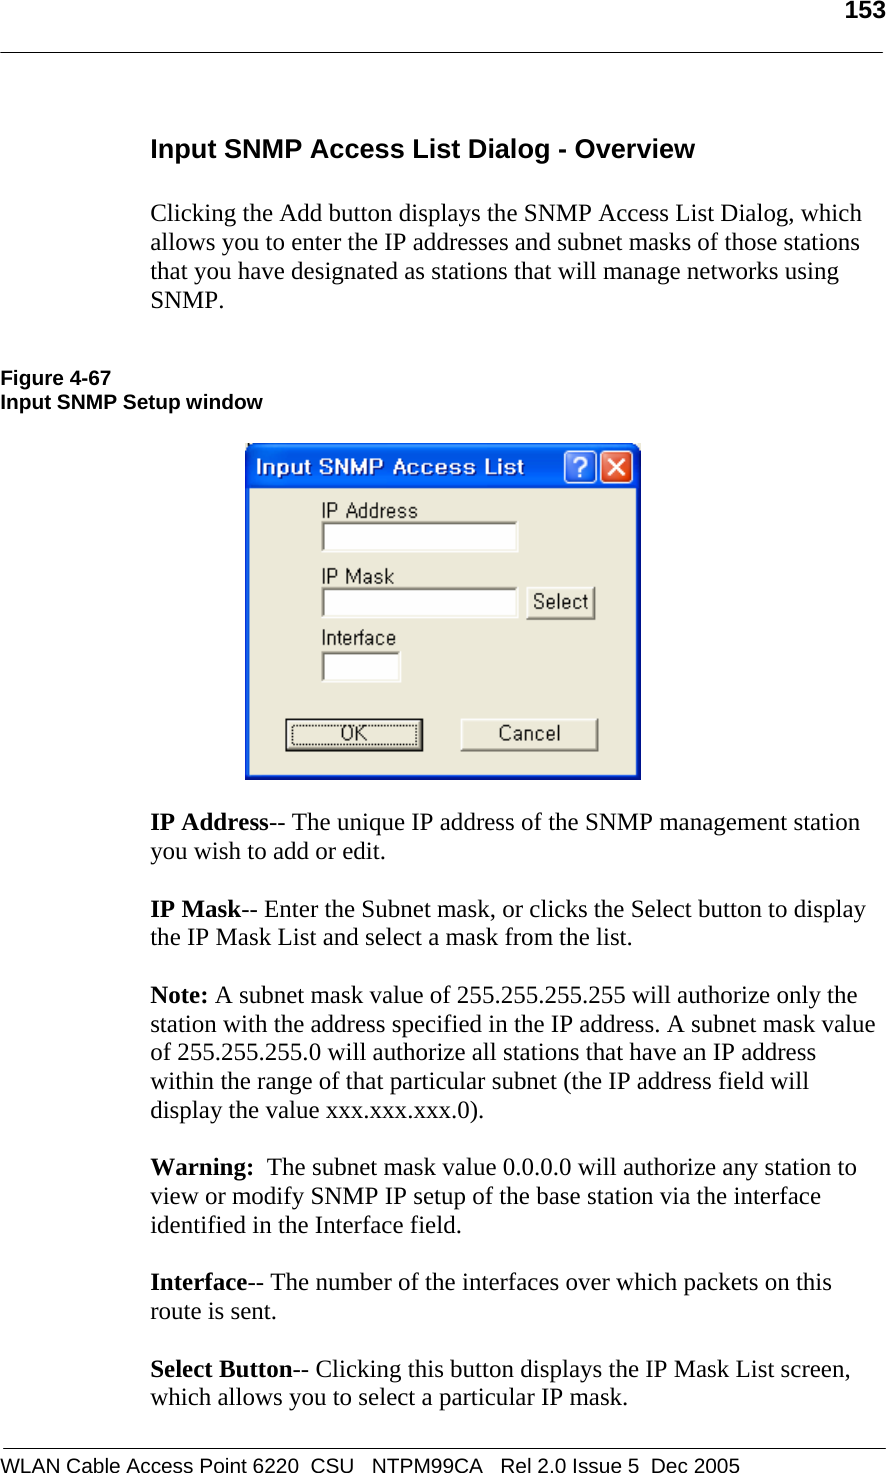   153  WLAN Cable Access Point 6220  CSU   NTPM99CA   Rel 2.0 Issue 5  Dec 2005 Input SNMP Access List Dialog - Overview  Clicking the Add button displays the SNMP Access List Dialog, which allows you to enter the IP addresses and subnet masks of those stations that you have designated as stations that will manage networks using SNMP.   Figure 4-67 Input SNMP Setup window    IP Address-- The unique IP address of the SNMP management station you wish to add or edit.  IP Mask-- Enter the Subnet mask, or clicks the Select button to display the IP Mask List and select a mask from the list.  Note: A subnet mask value of 255.255.255.255 will authorize only the station with the address specified in the IP address. A subnet mask value of 255.255.255.0 will authorize all stations that have an IP address within the range of that particular subnet (the IP address field will display the value xxx.xxx.xxx.0).   Warning:  The subnet mask value 0.0.0.0 will authorize any station to view or modify SNMP IP setup of the base station via the interface identified in the Interface field.  Interface-- The number of the interfaces over which packets on this route is sent.  Select Button-- Clicking this button displays the IP Mask List screen, which allows you to select a particular IP mask. 